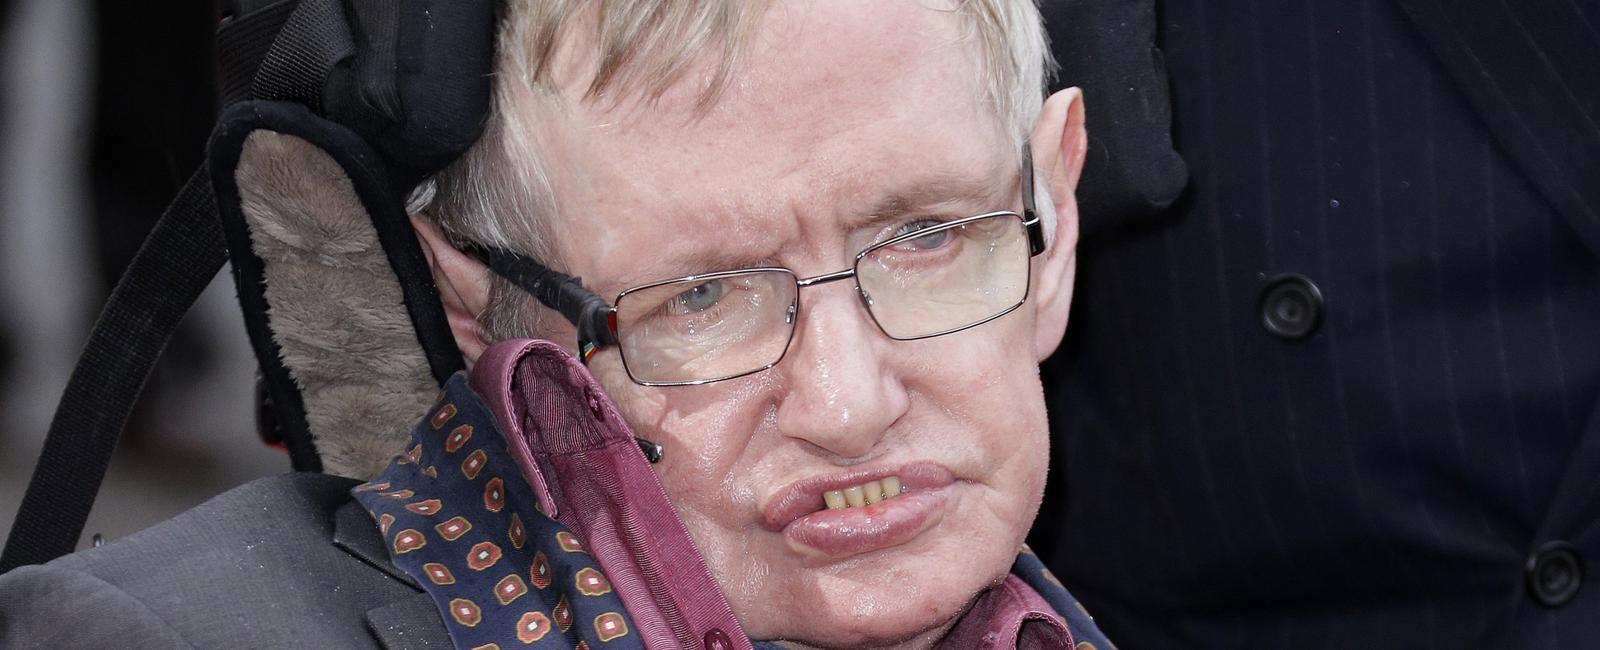 British theoretical physicist stephen hawking is famous for his work on black holes he also wrote books such as a brief history of time enabling a wide audience to appreciate his ideas